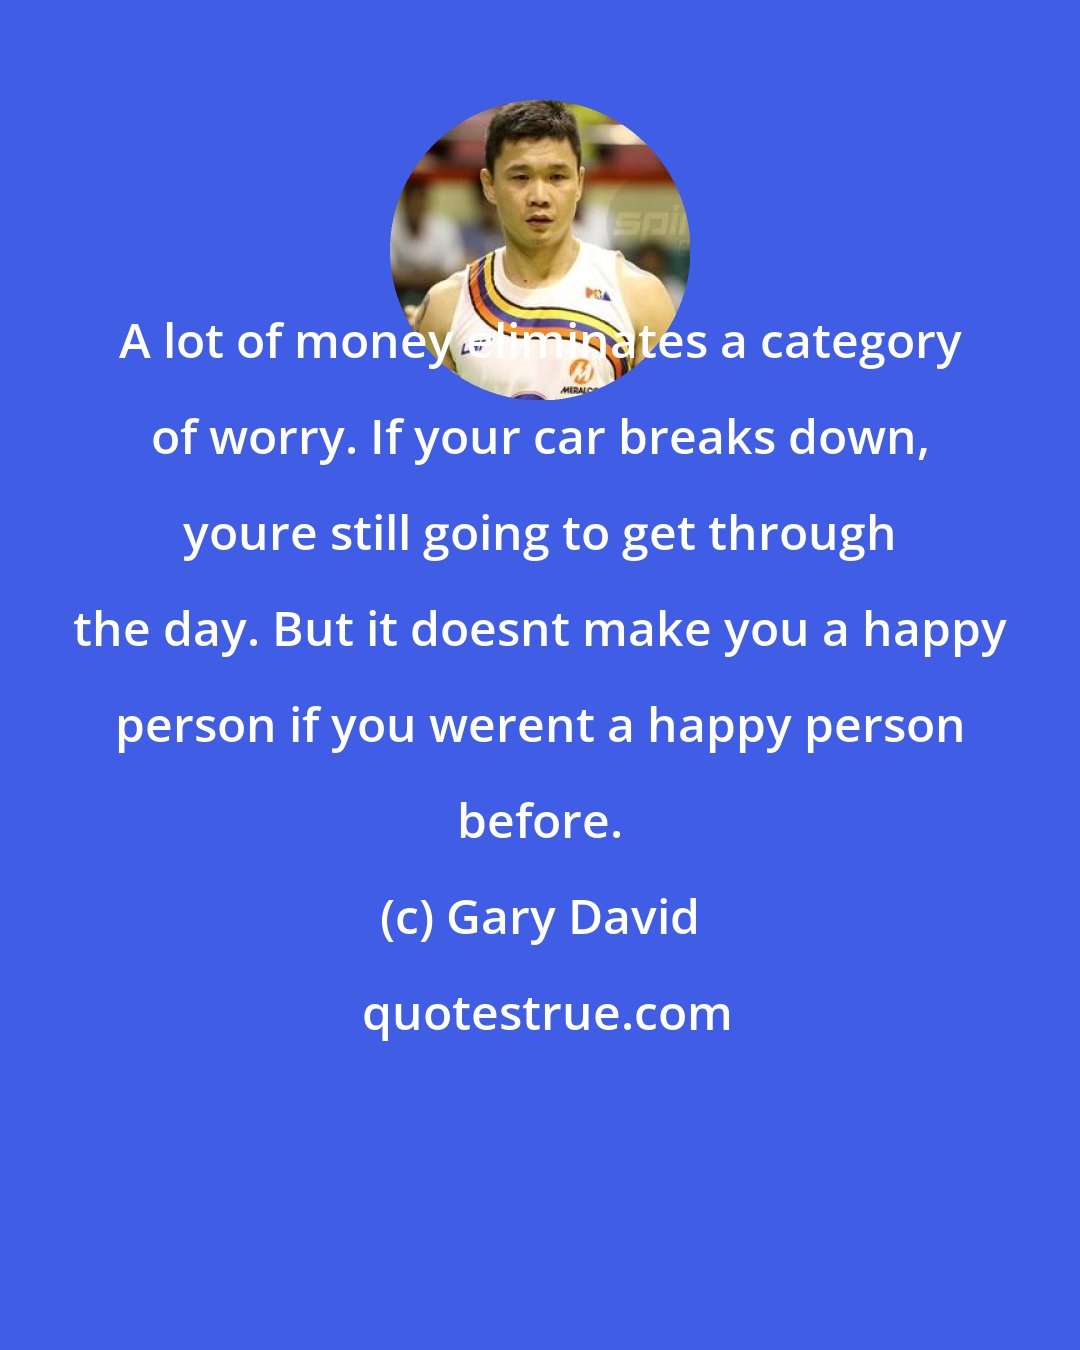 Gary David: A lot of money eliminates a category of worry. If your car breaks down, youre still going to get through the day. But it doesnt make you a happy person if you werent a happy person before.